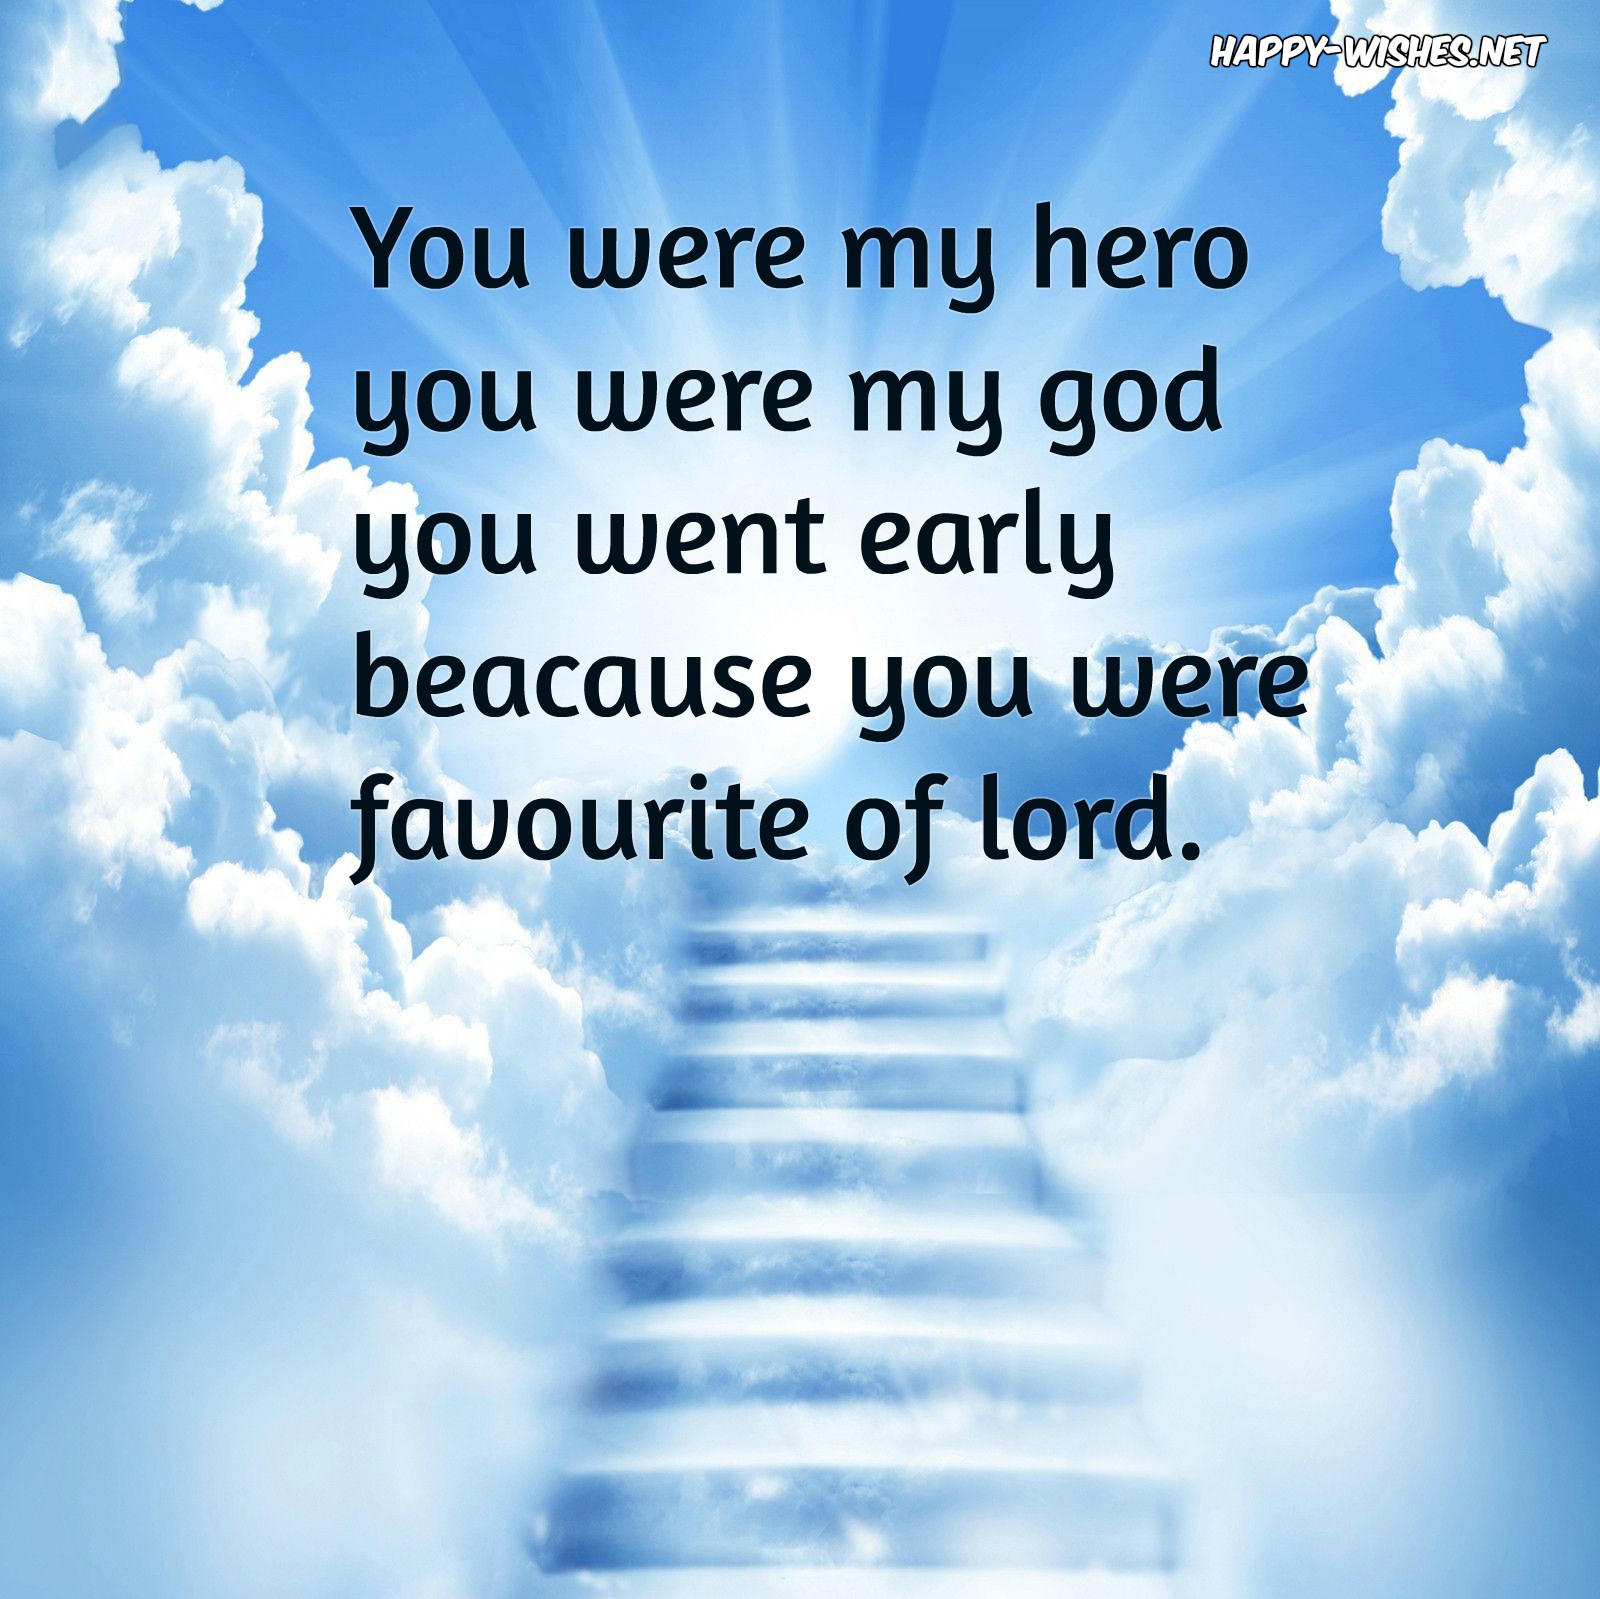 Happy Birthday in Heaven Quotes & messages